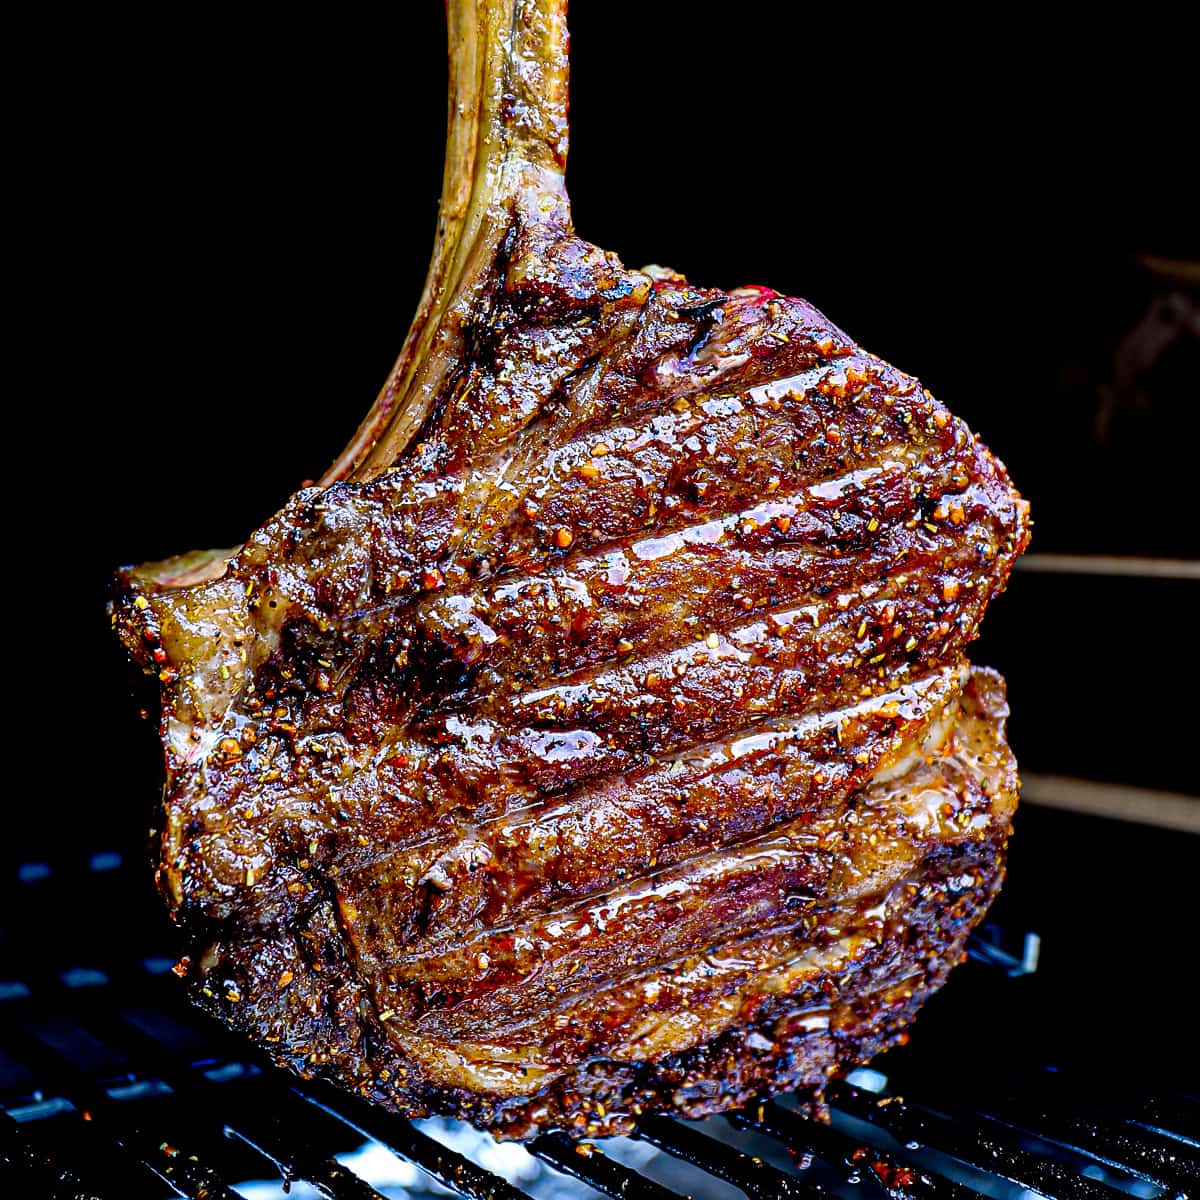 Traeger Smoked Tomahawk Steak With Reverse Sear On The Grill